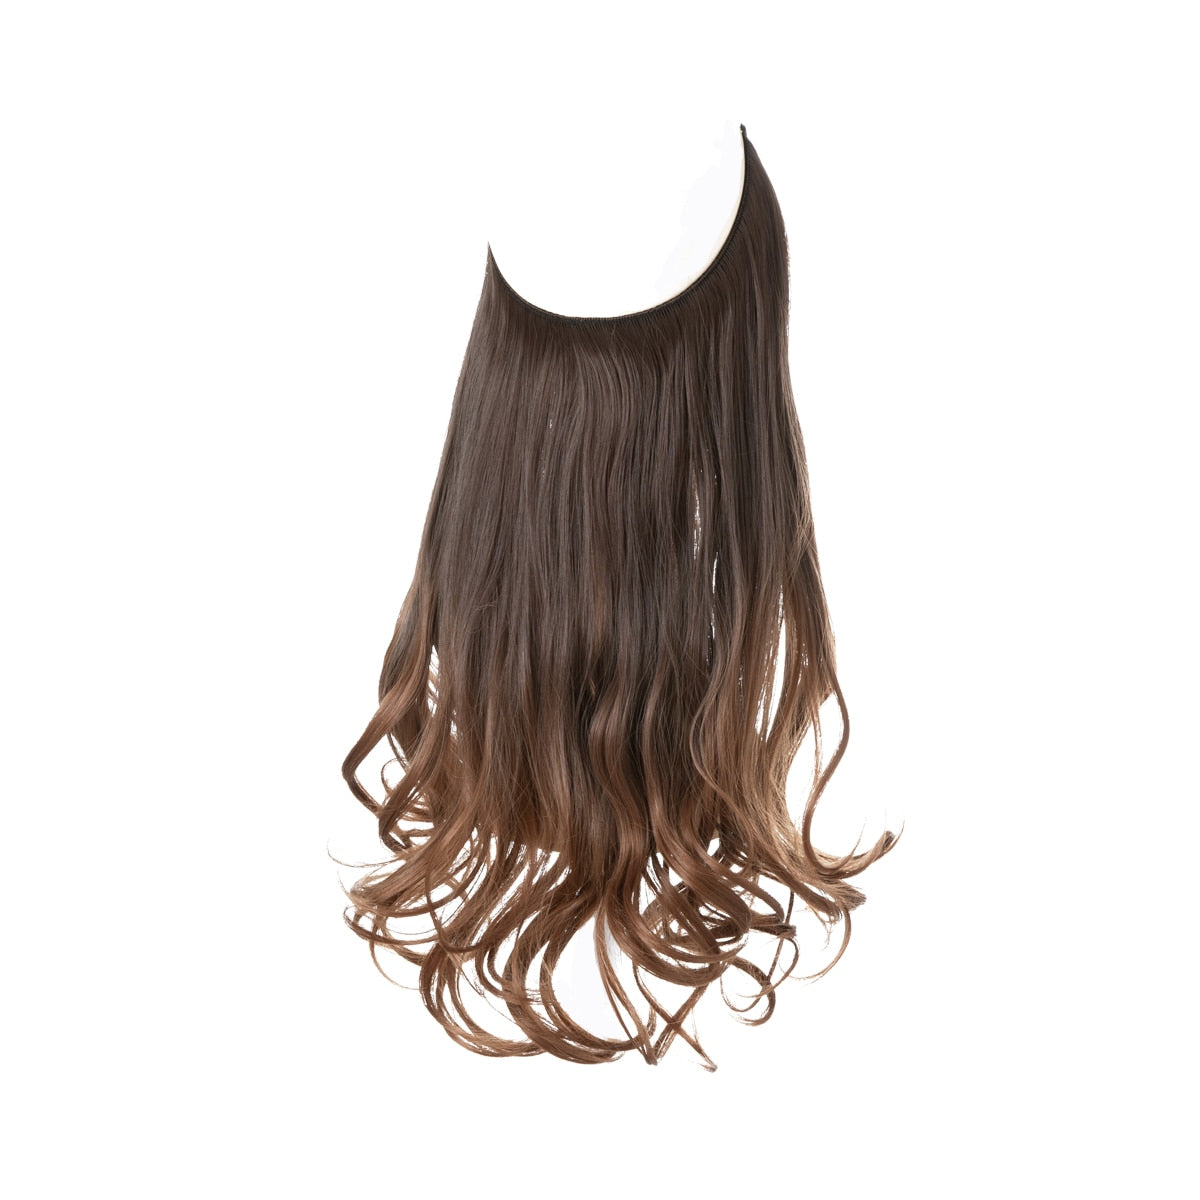 TEEK - Invisible Synth No Clip No Comb Wave Hair Extensions | Dark Varieties HAIR theteekdotcom 6T30 14inches 